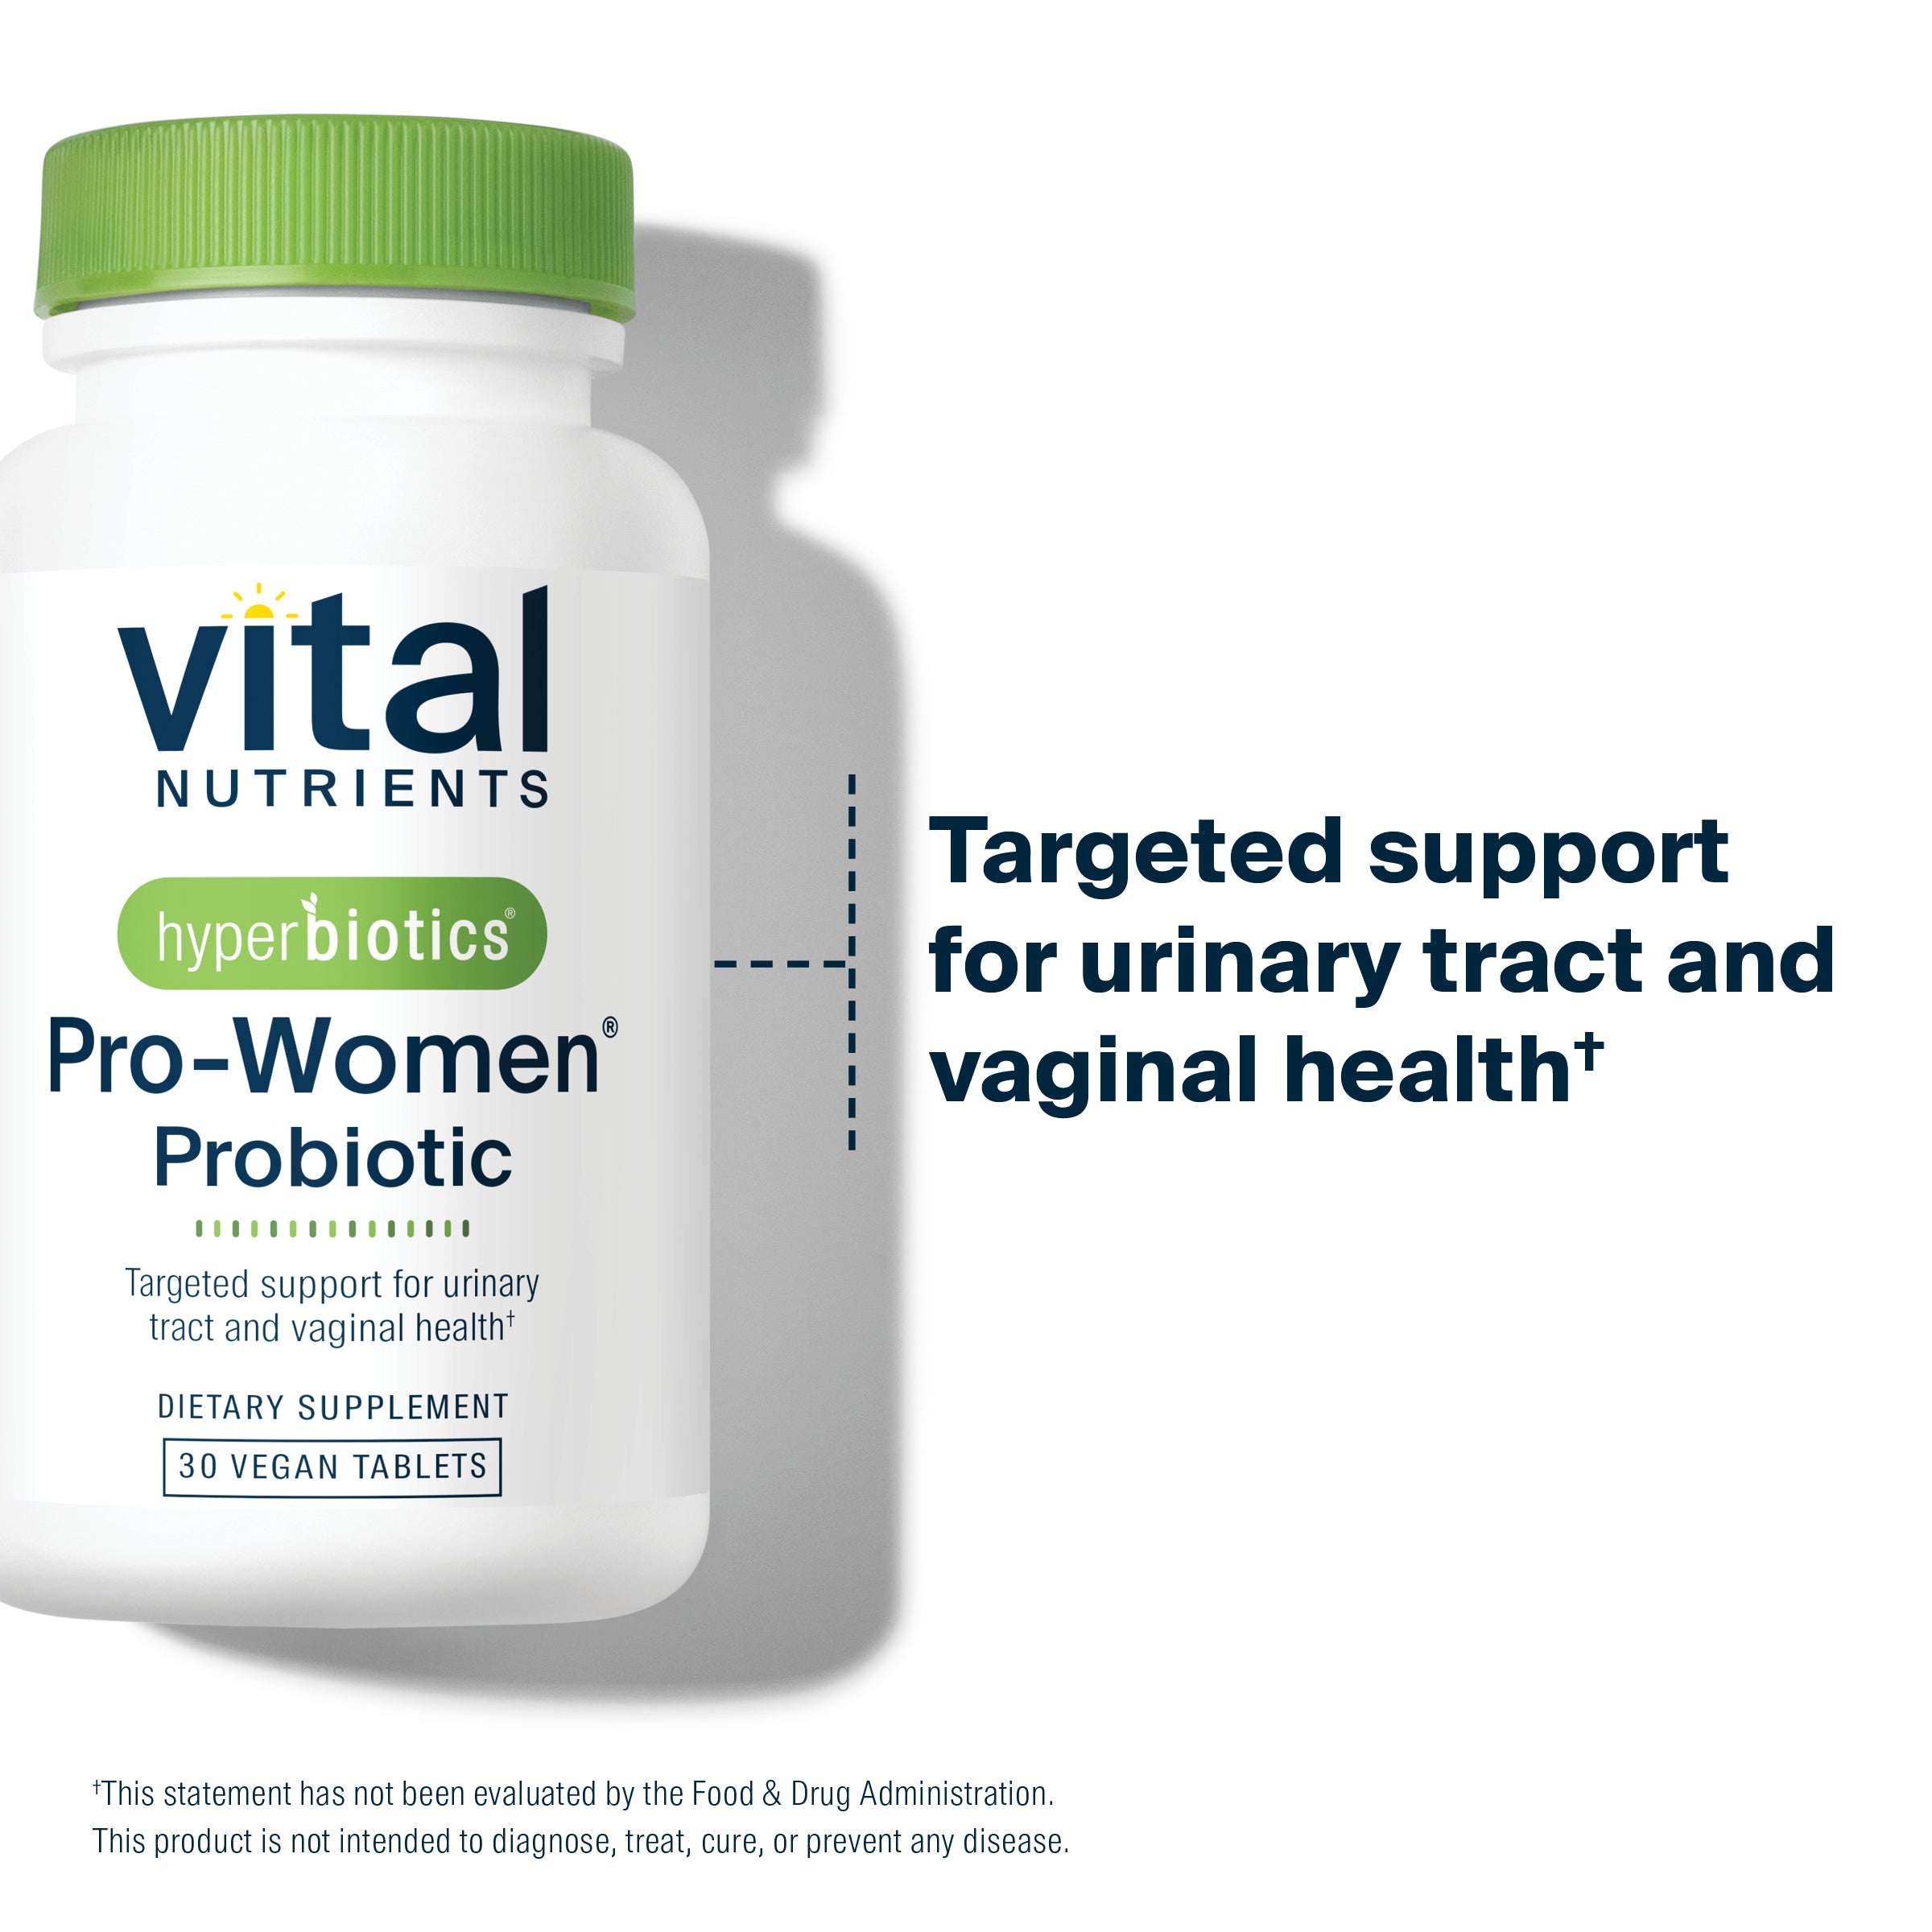 Hyperbiotics Pro-Women Probiotic 30 vegan tablets targeted support for urinary tract and vaginal health.*